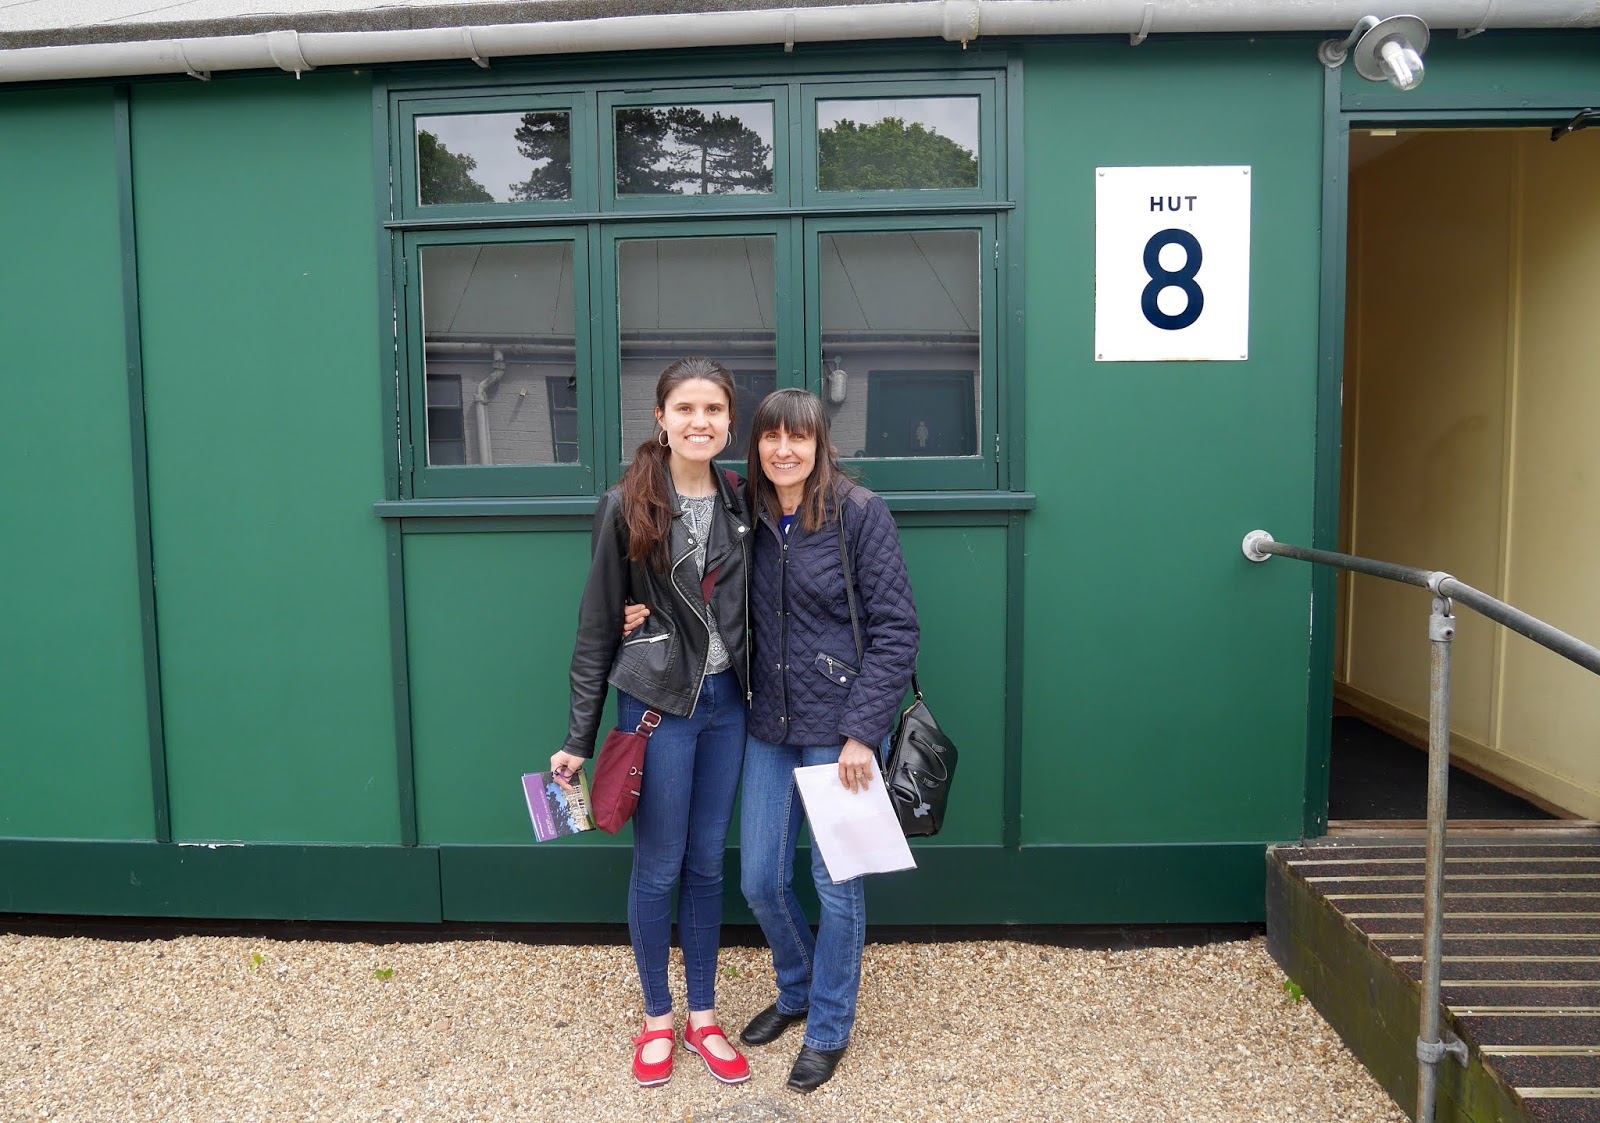 Alan Turing's Hut 8 at Bletchley Park